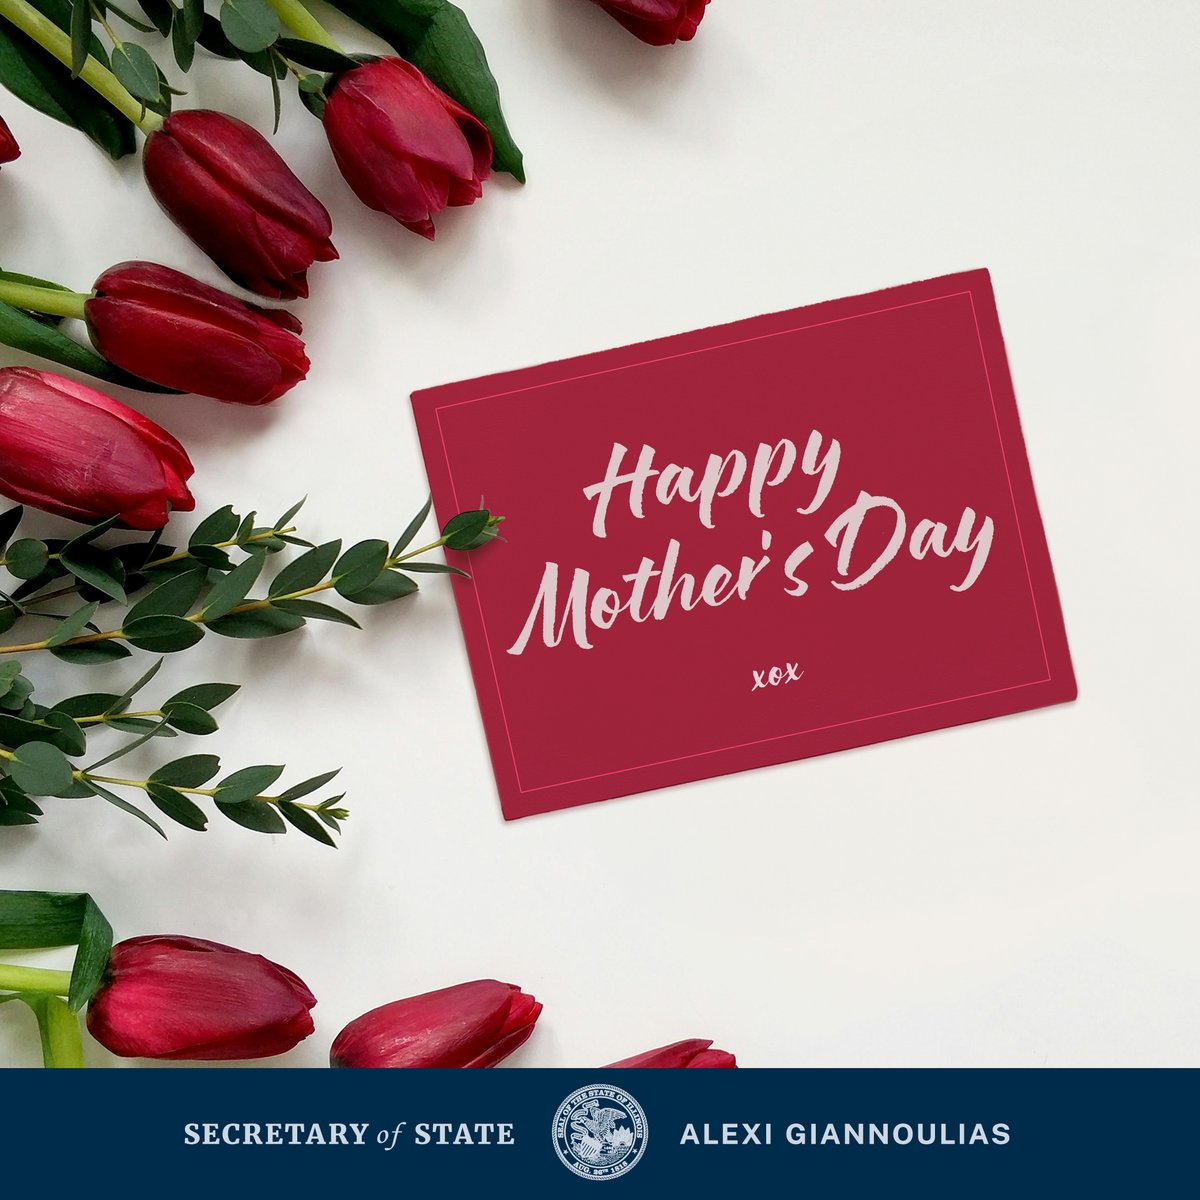 Happy #MothersDay to all the amazing moms out there! 💐 Your love, strength, and endless support make the world a better place. Today, we celebrate you!